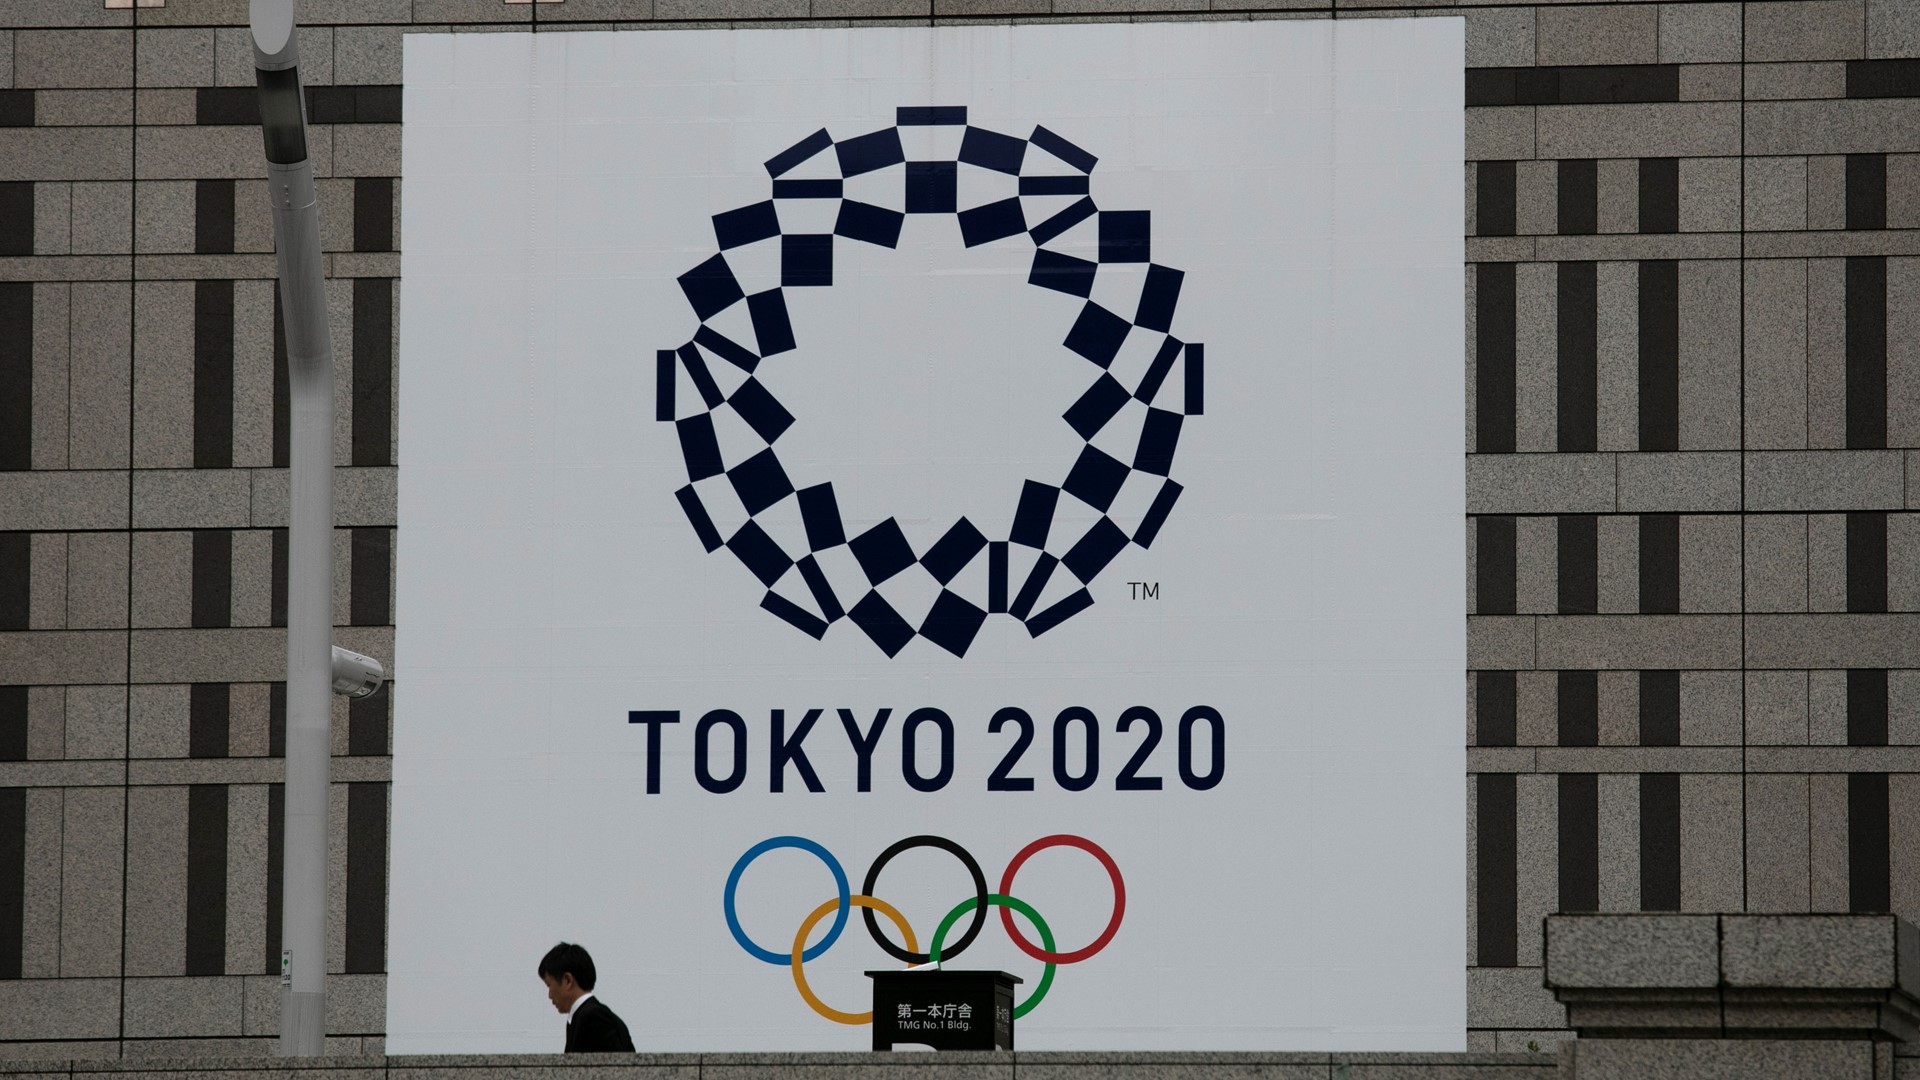 Opening ceremonies for the Tokyo Olympic Games are 100 days away, but what will this year's games look like with so much of the world affected by the pandemic?